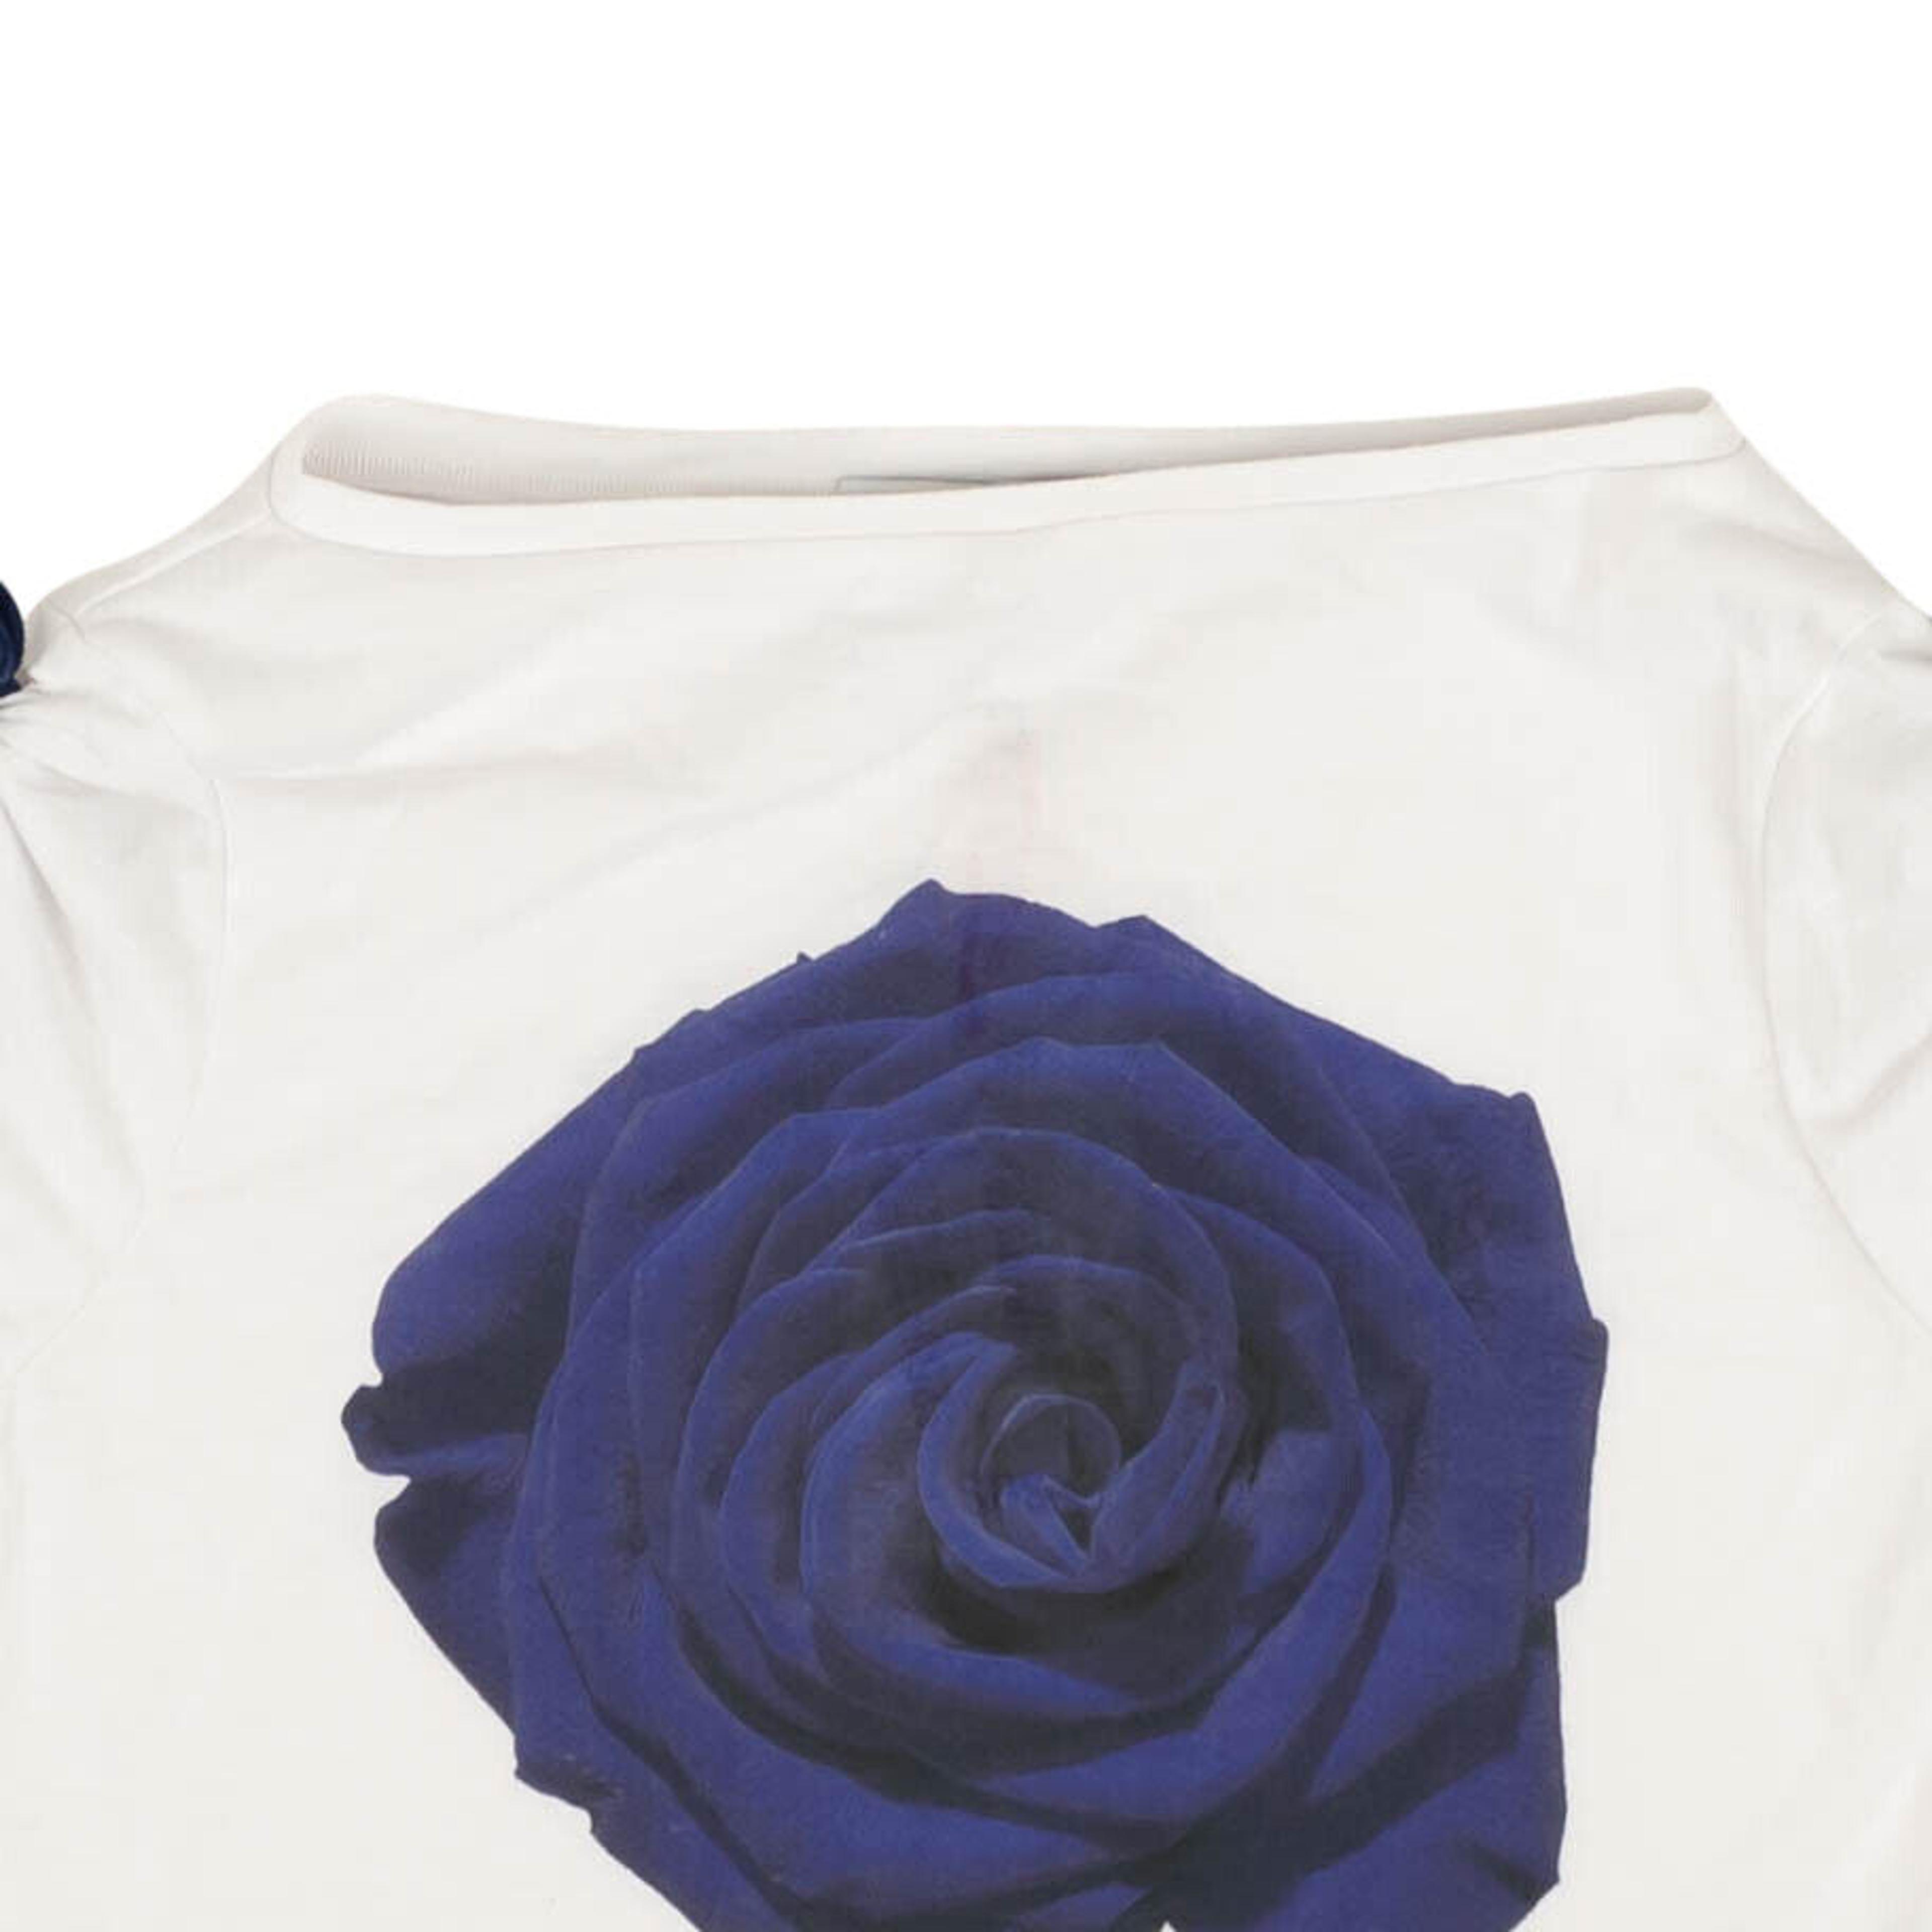 Alternate View 1 of White And Blue Rose Short Sleeve T-Shirt